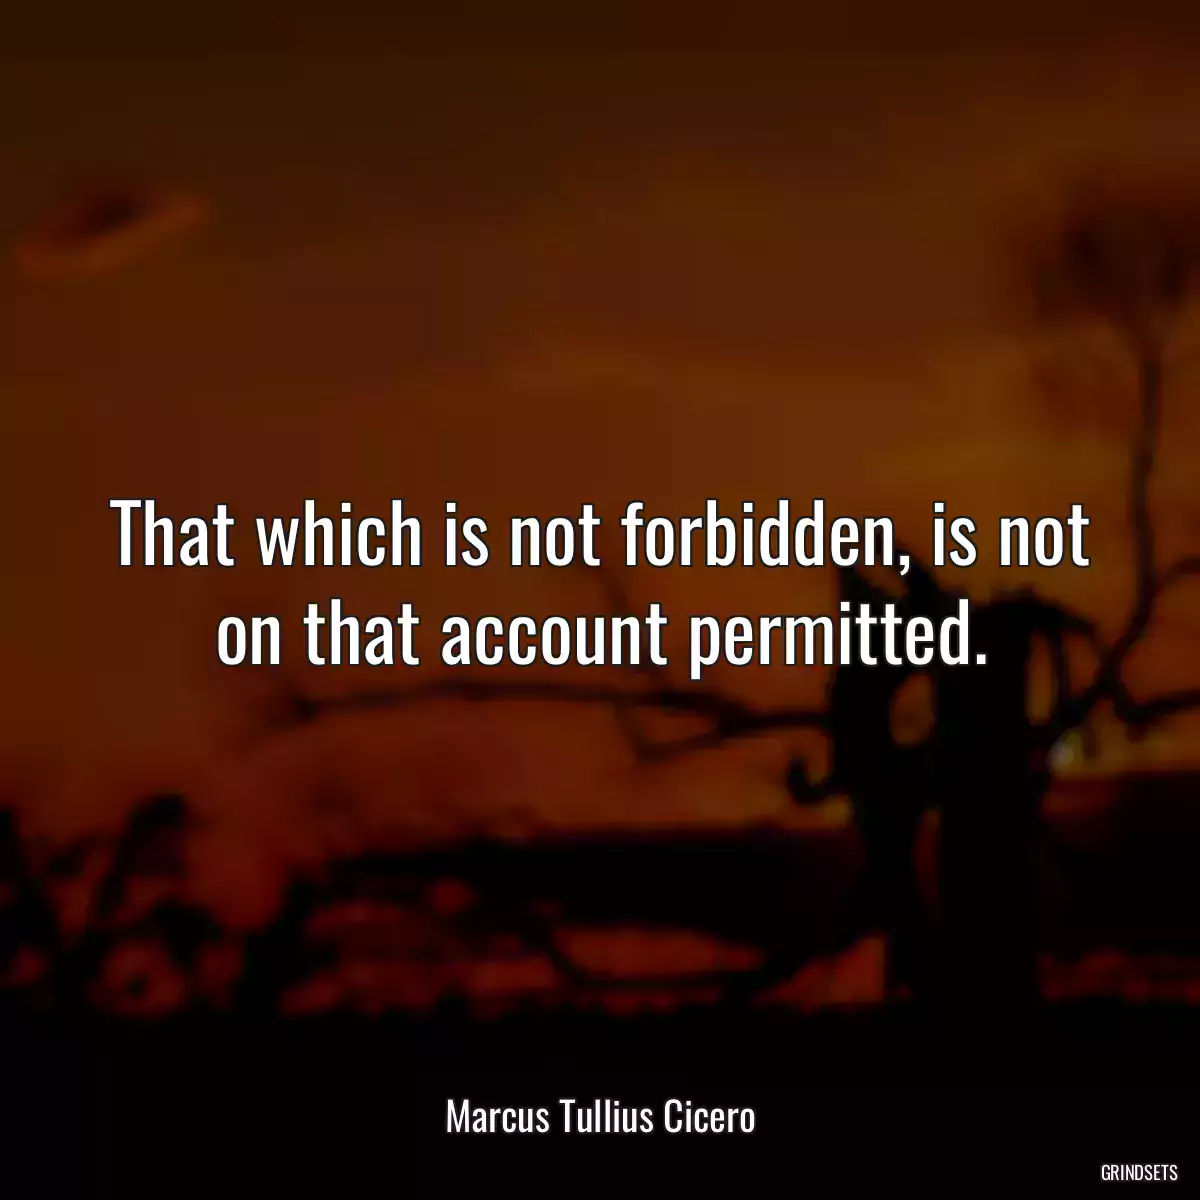 That which is not forbidden, is not on that account permitted.